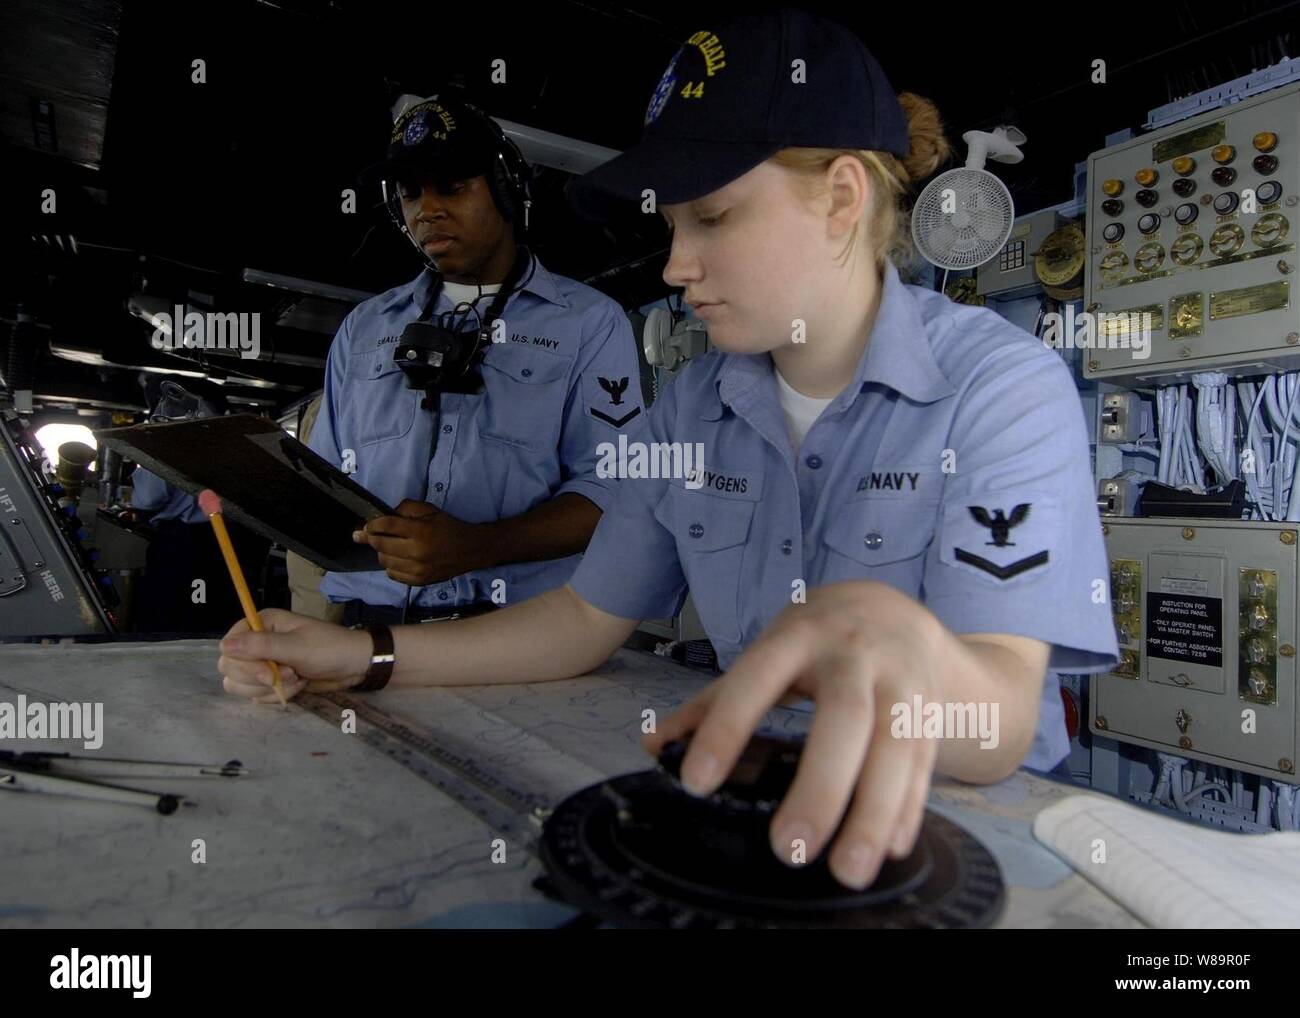 U.S. Navy Petty Officer 3rd Class Nicole Huygens (right) plots the ships course while Petty Officer 3rd Class Benjamin Smalls relays new navigational coordinates to the combat information center of the USS Gunston Hall (LSD 44) on July 17, 2005.  U.S. and Saudi Arabian Navies are participating in Exercise Nautical Union, a joint exercise in conducting Maritime Security Operations, air defense, anti-submarine warfare, surface warfare, mine counter measures, electronic warfare, replenishment at sea, and command and control. Stock Photo